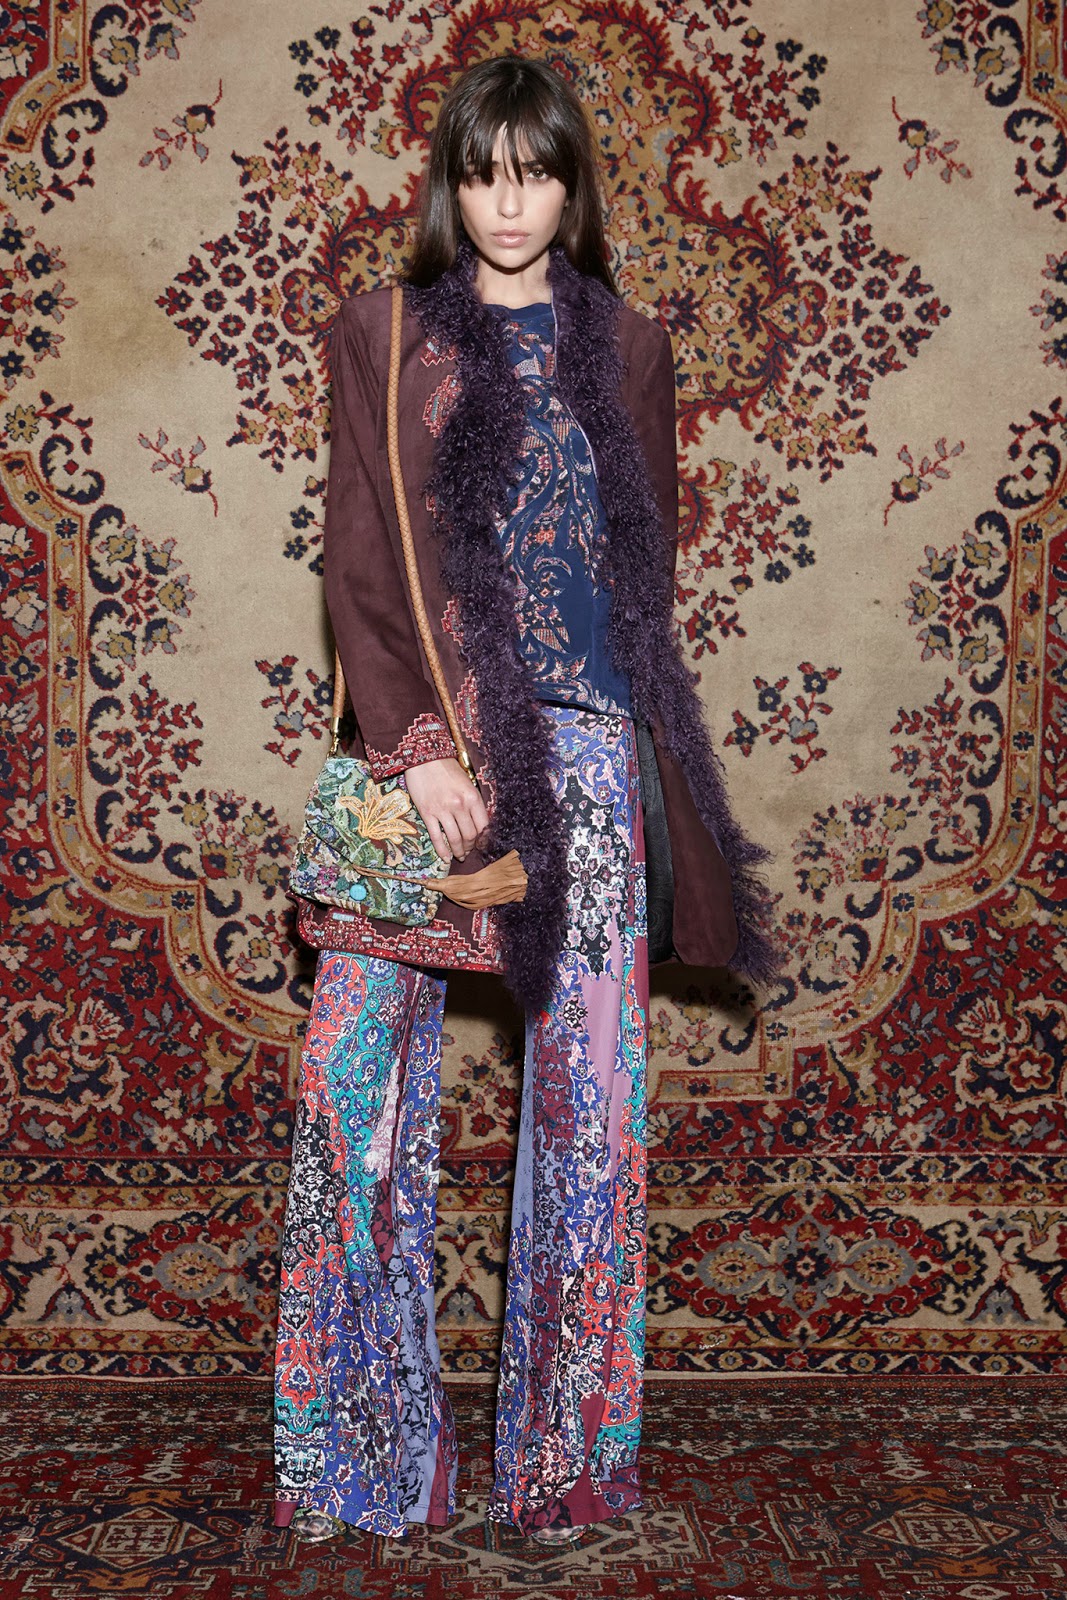 Serendipitylands: NICOLE MILLER COLLECTION PRE-FALL 2015